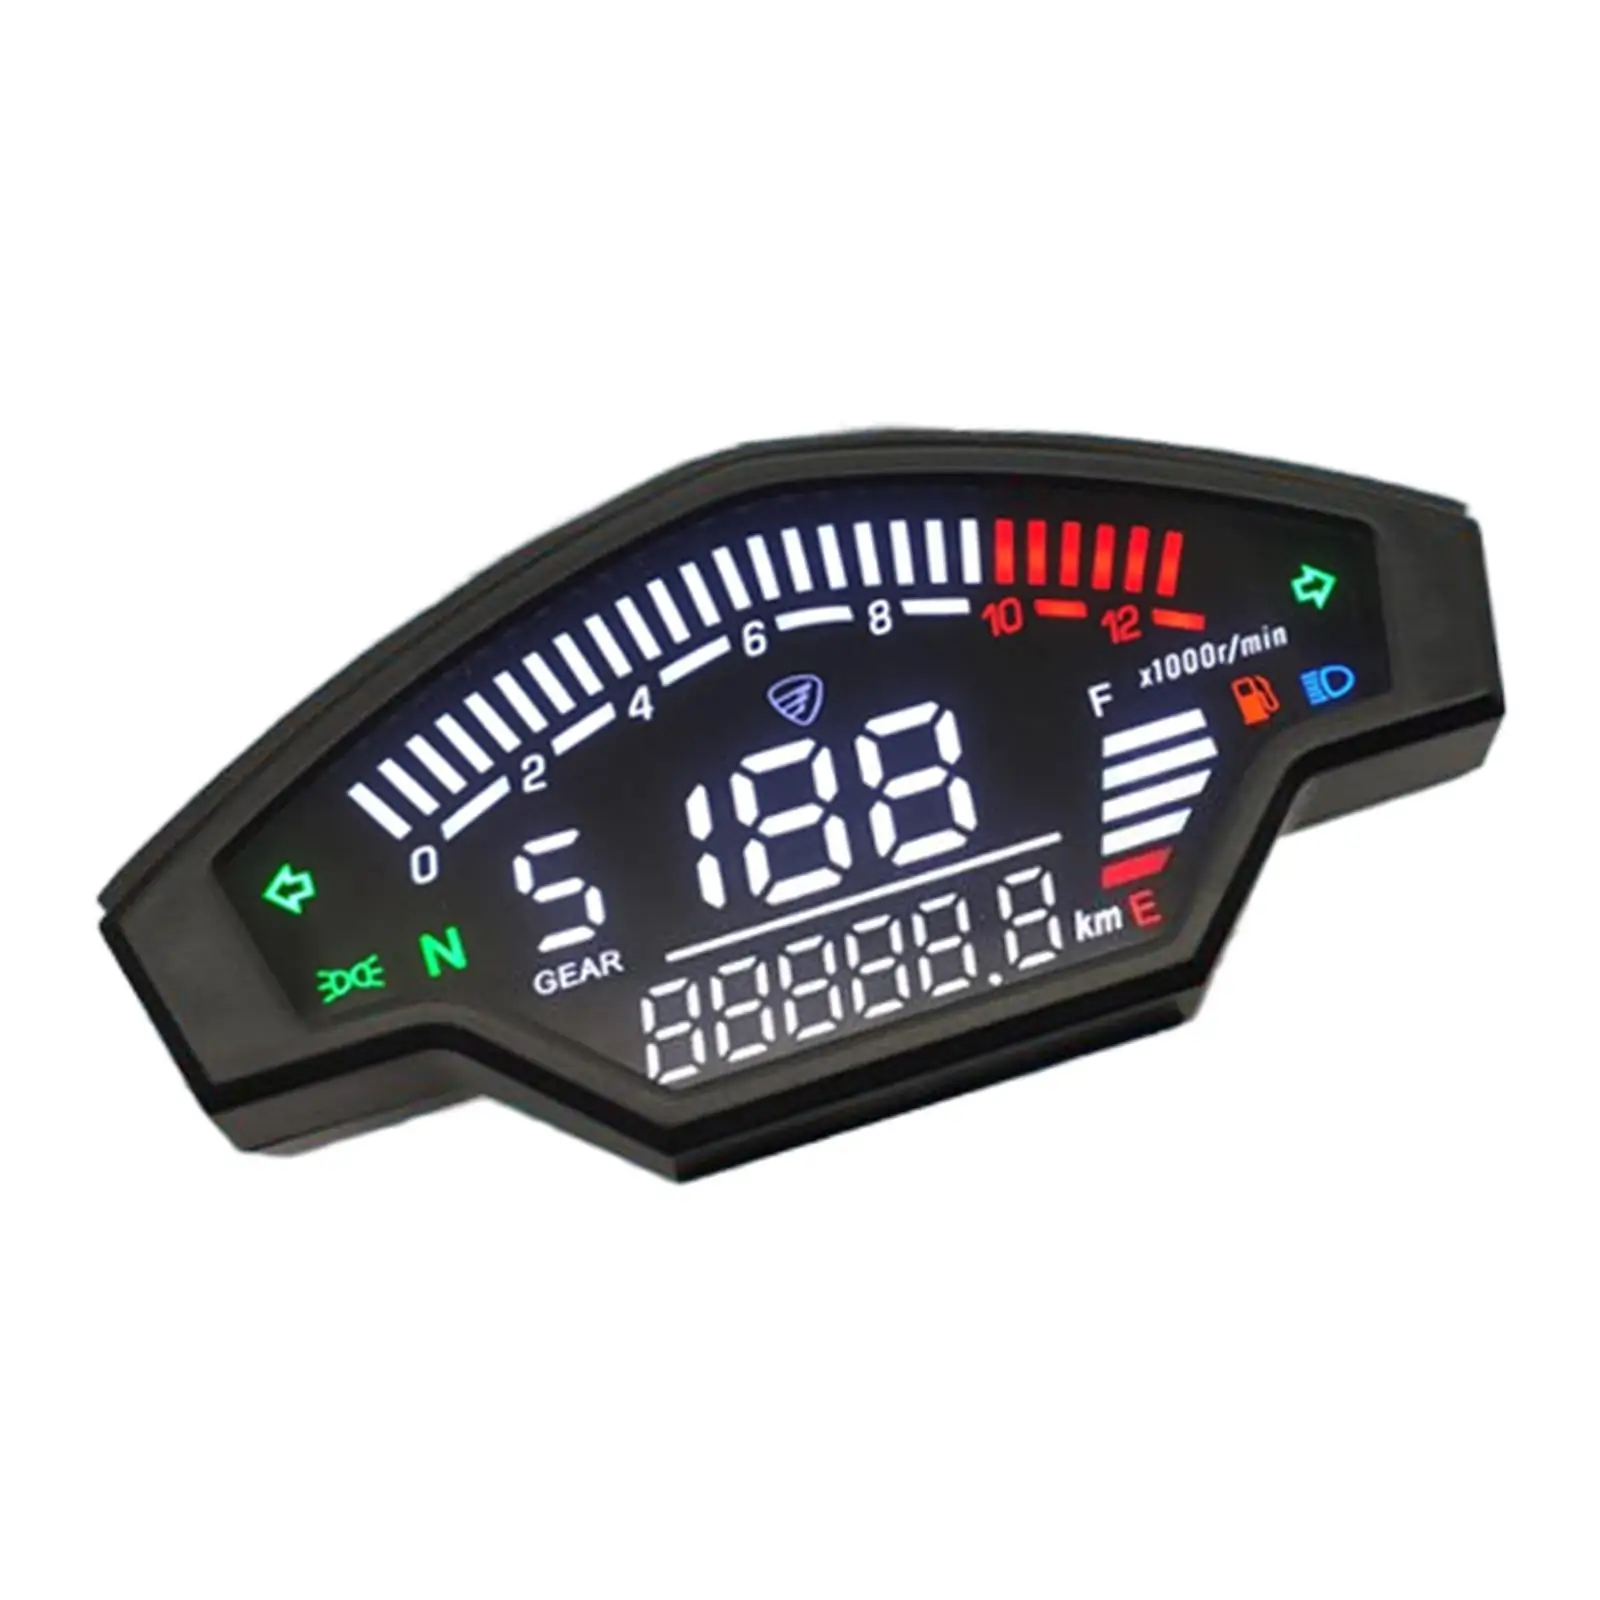 Professional Motorcycle Speedometer for KR200 Electric Motorcycle Modification